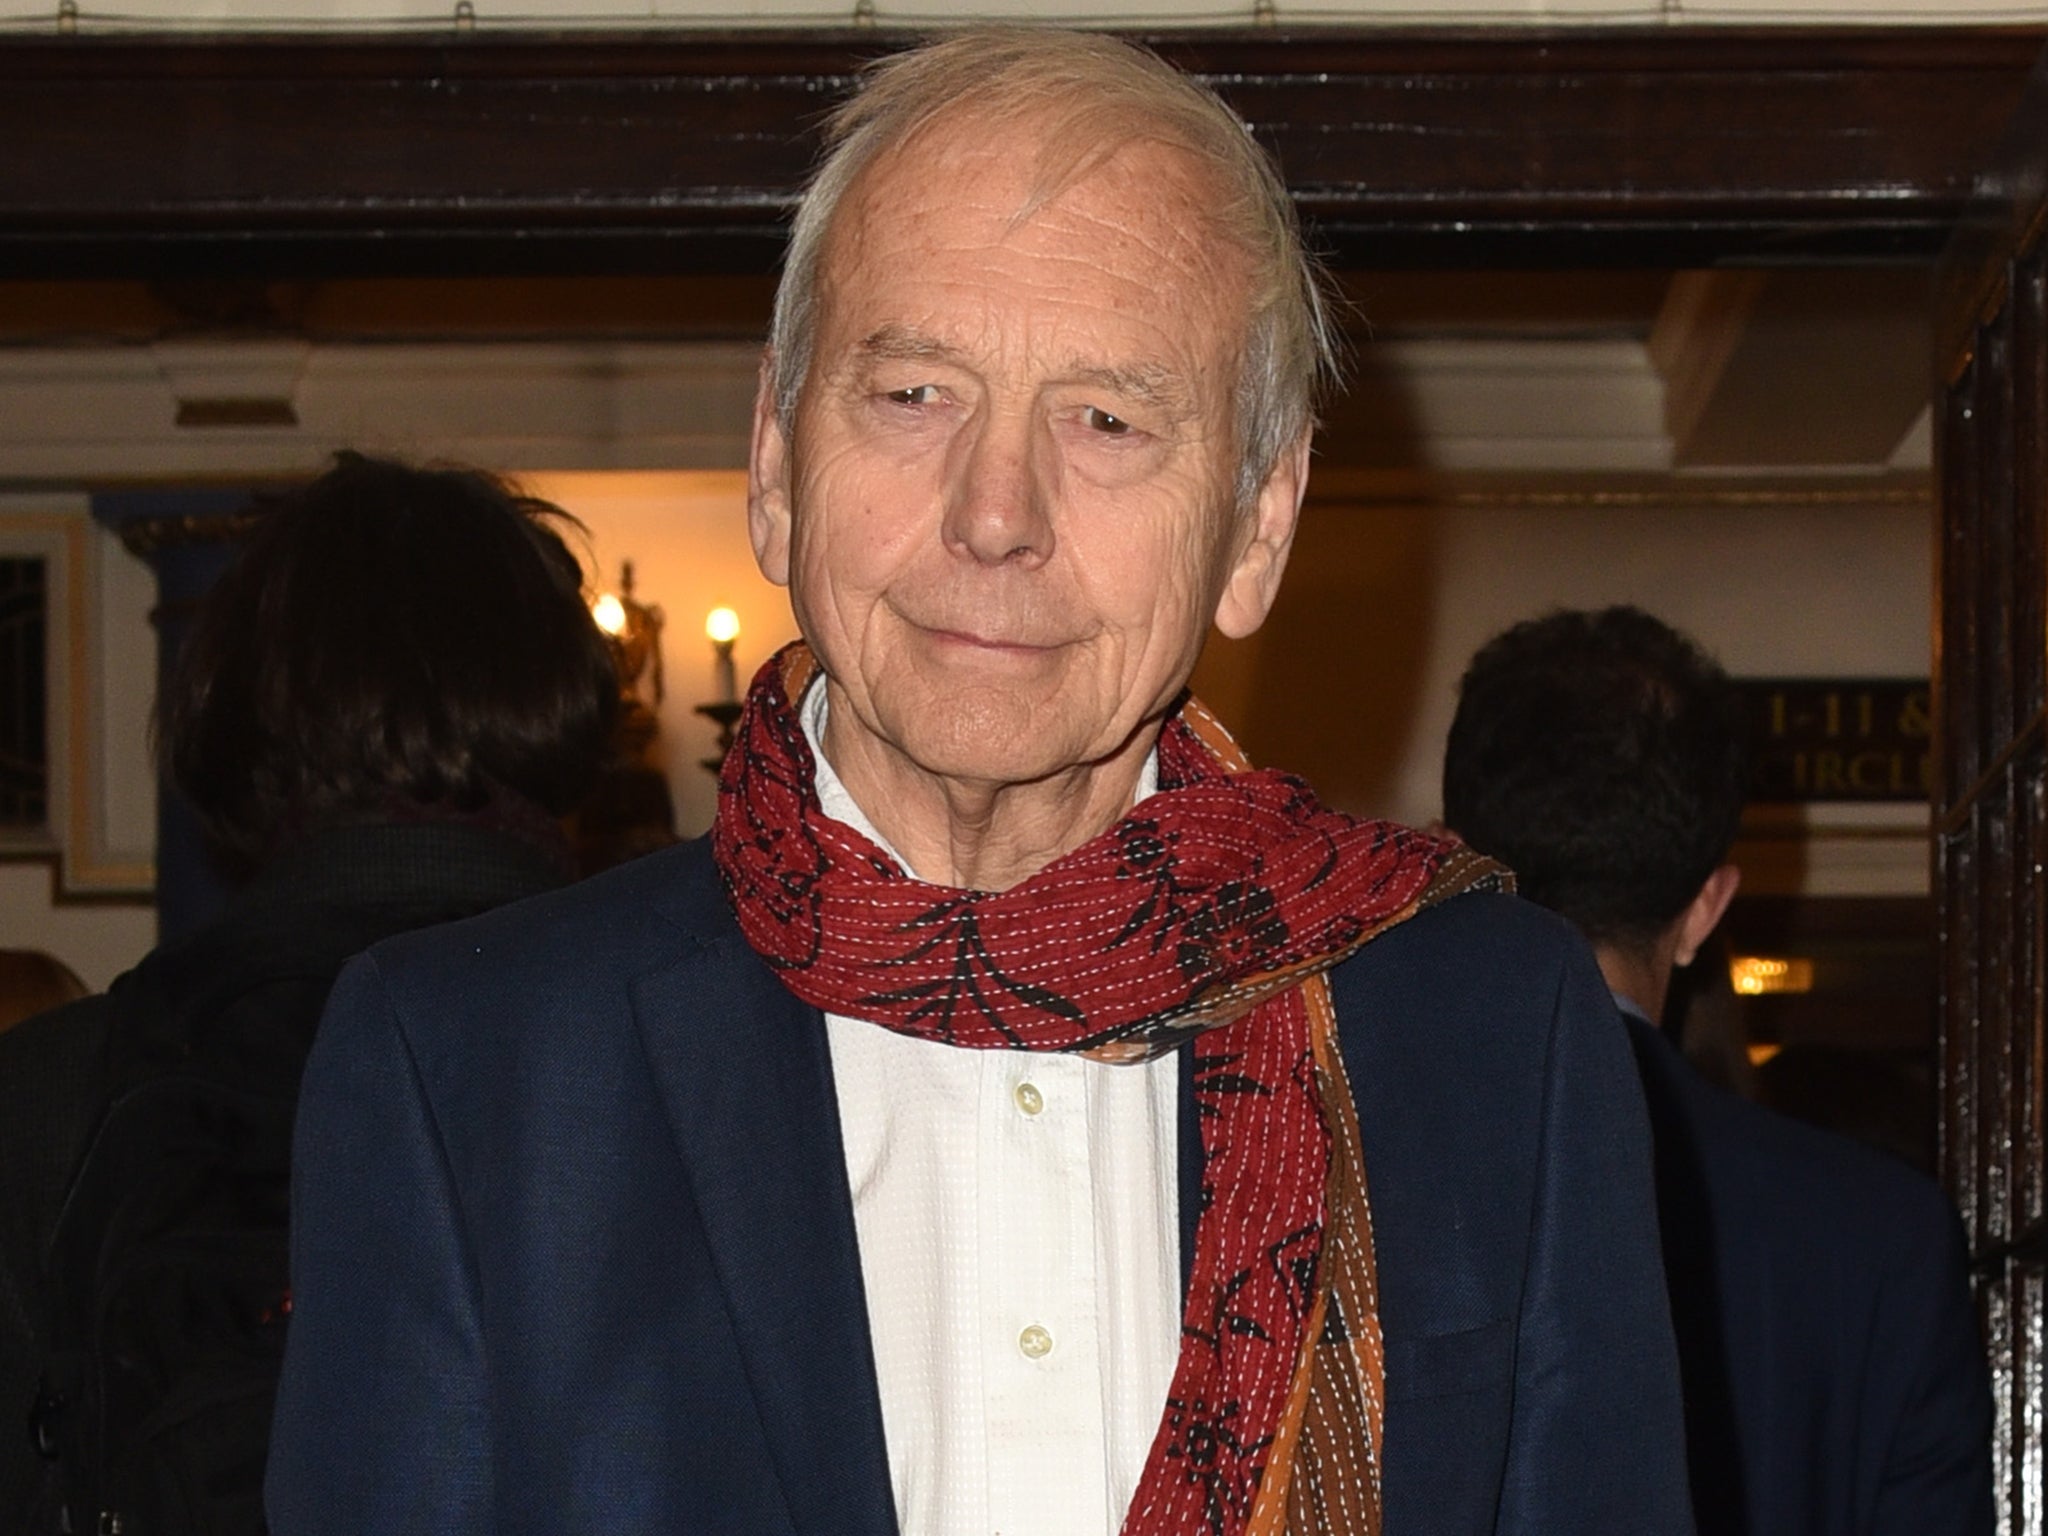 'Why can’t you have an atheist? Or an agnostic?' John Humphrys asks